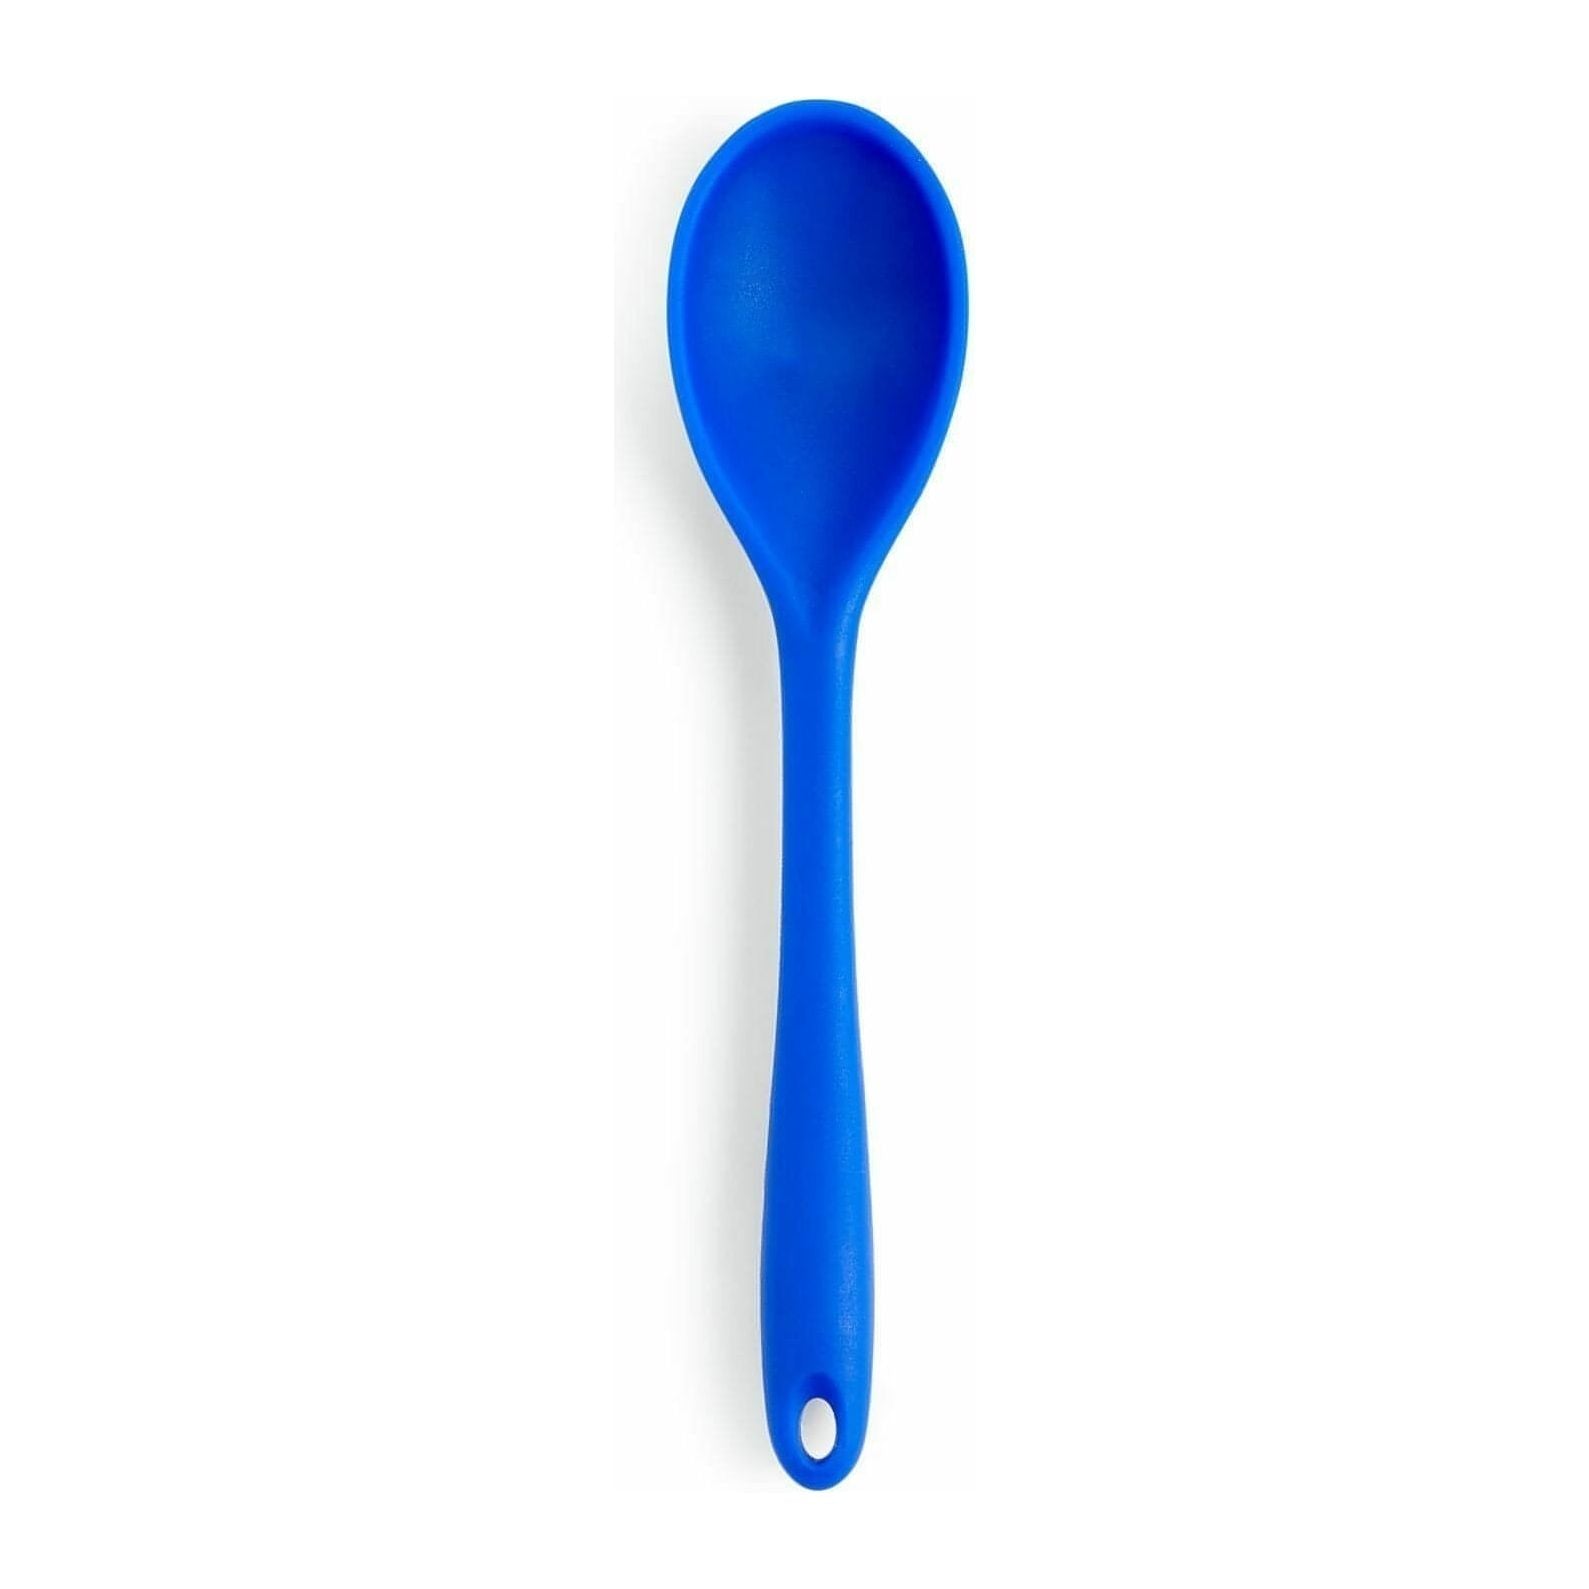 Art & Cook-Art & Cook 10.5" Silicone Solid Spoon (Blue) - Brandat Outlet